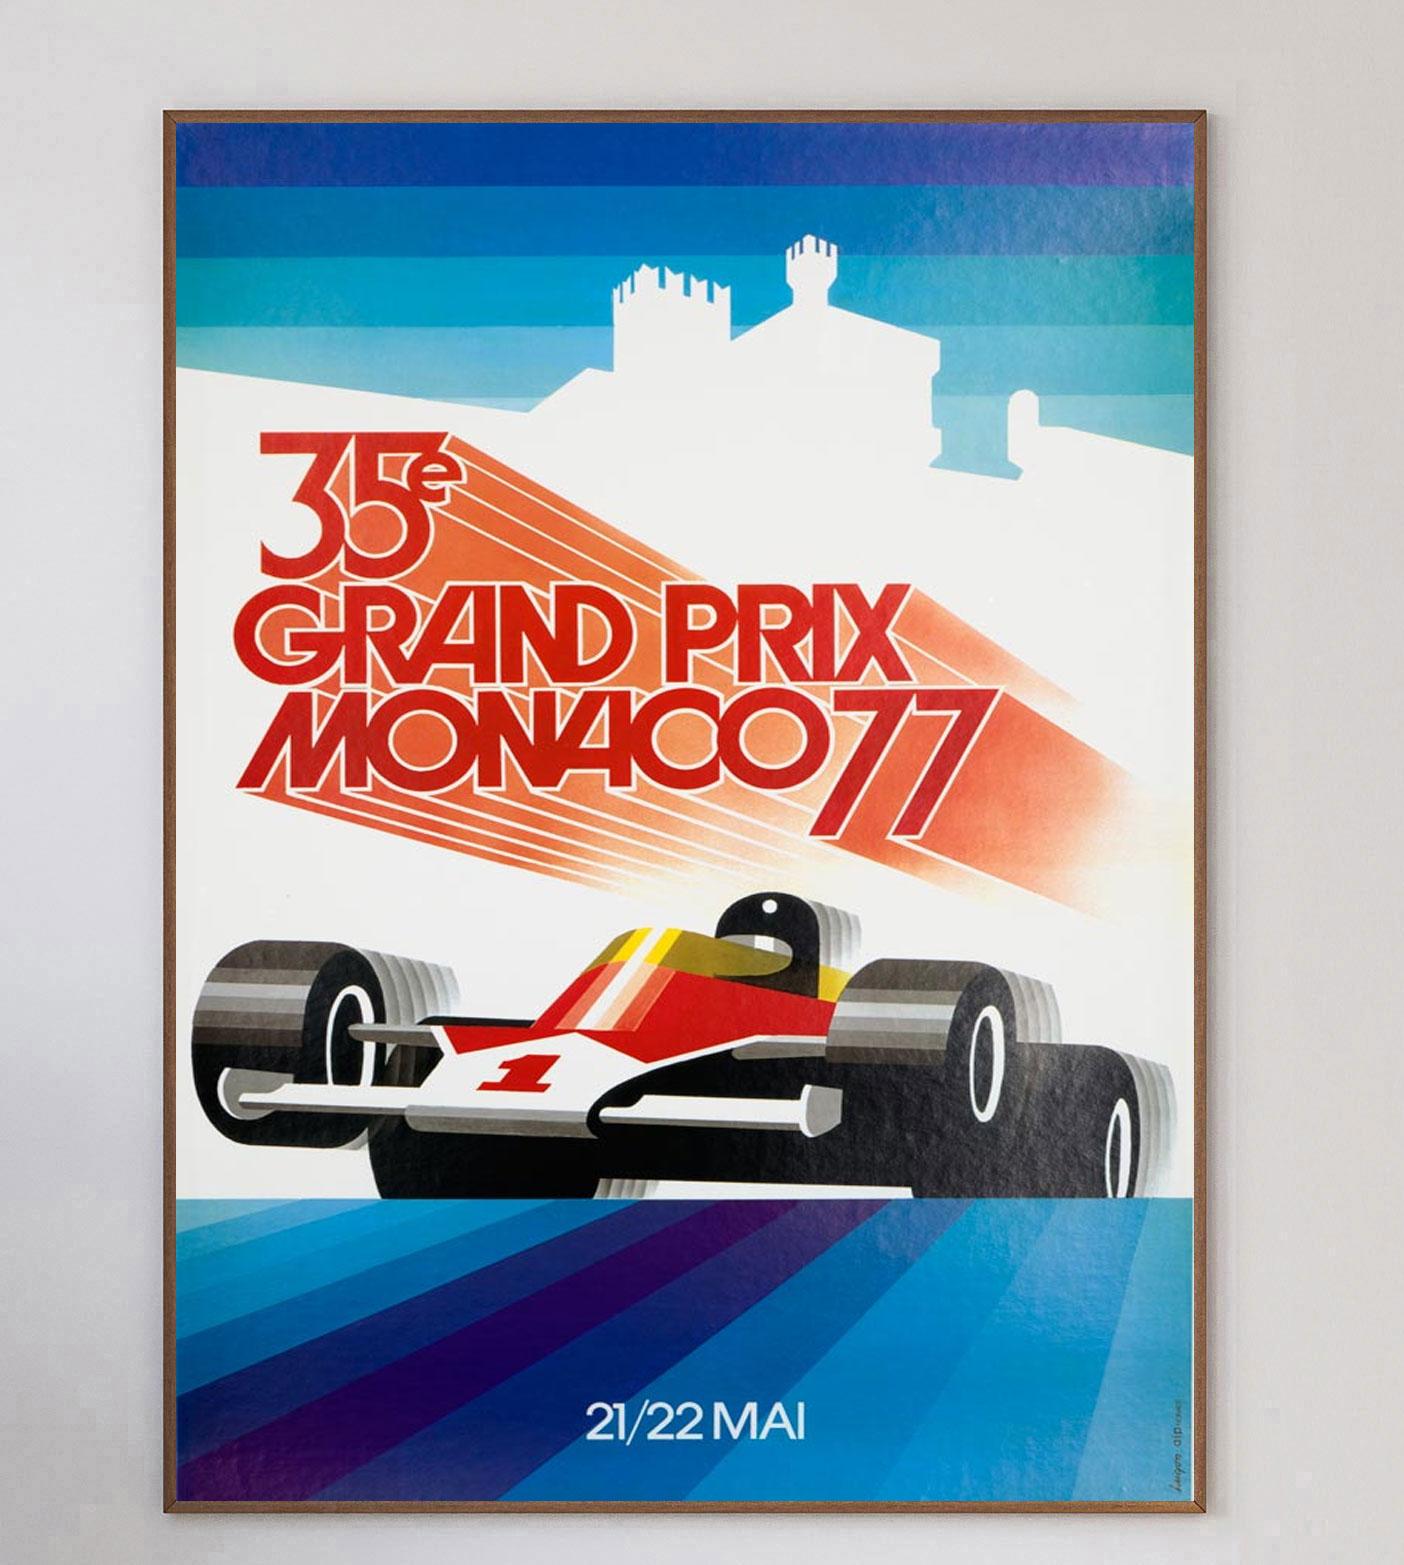 This poster is for the 1977 Monaco Grand Prix, with the brilliant illustration design by Carpenter. The vibrant and modern artwork depicts the speed of the racers.

The 1977 Monaco Grand Prix was held on 22nd May 1977 and was won by Jody Scheckter